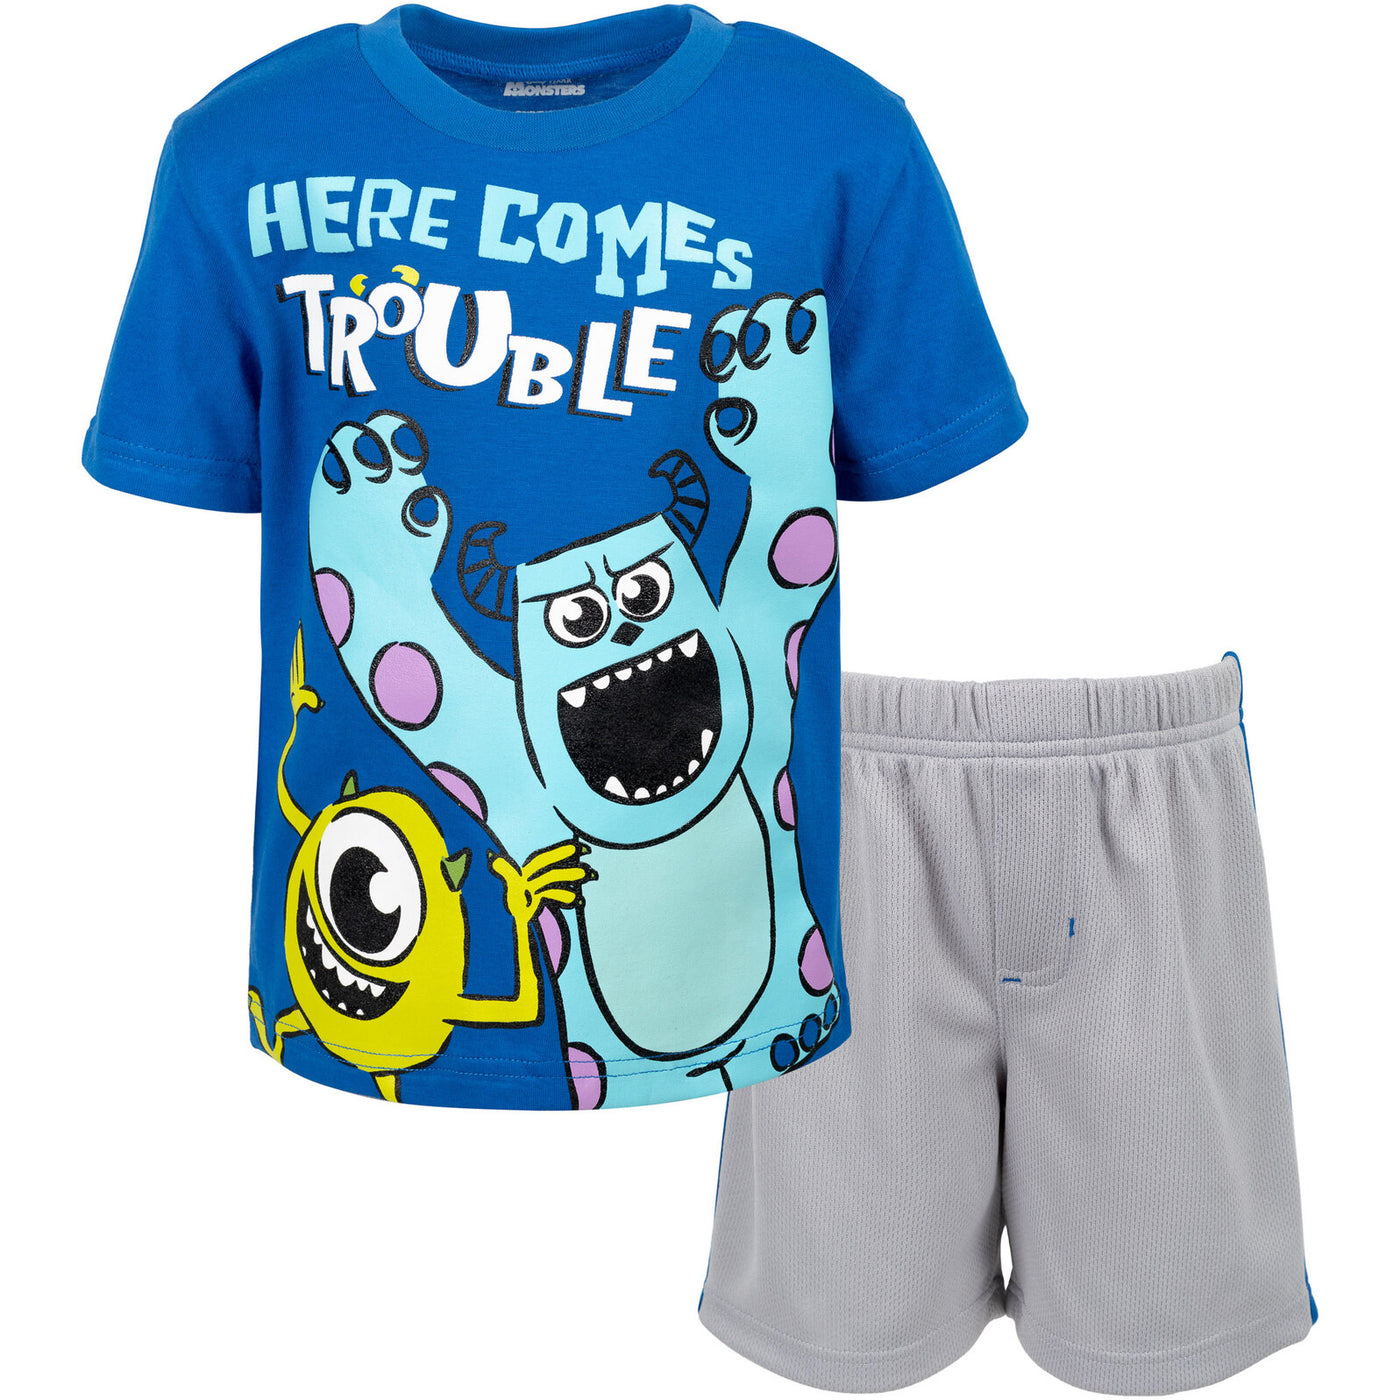 Disney Monsters Inc. T-Shirt and Mesh Shorts Outfit Set